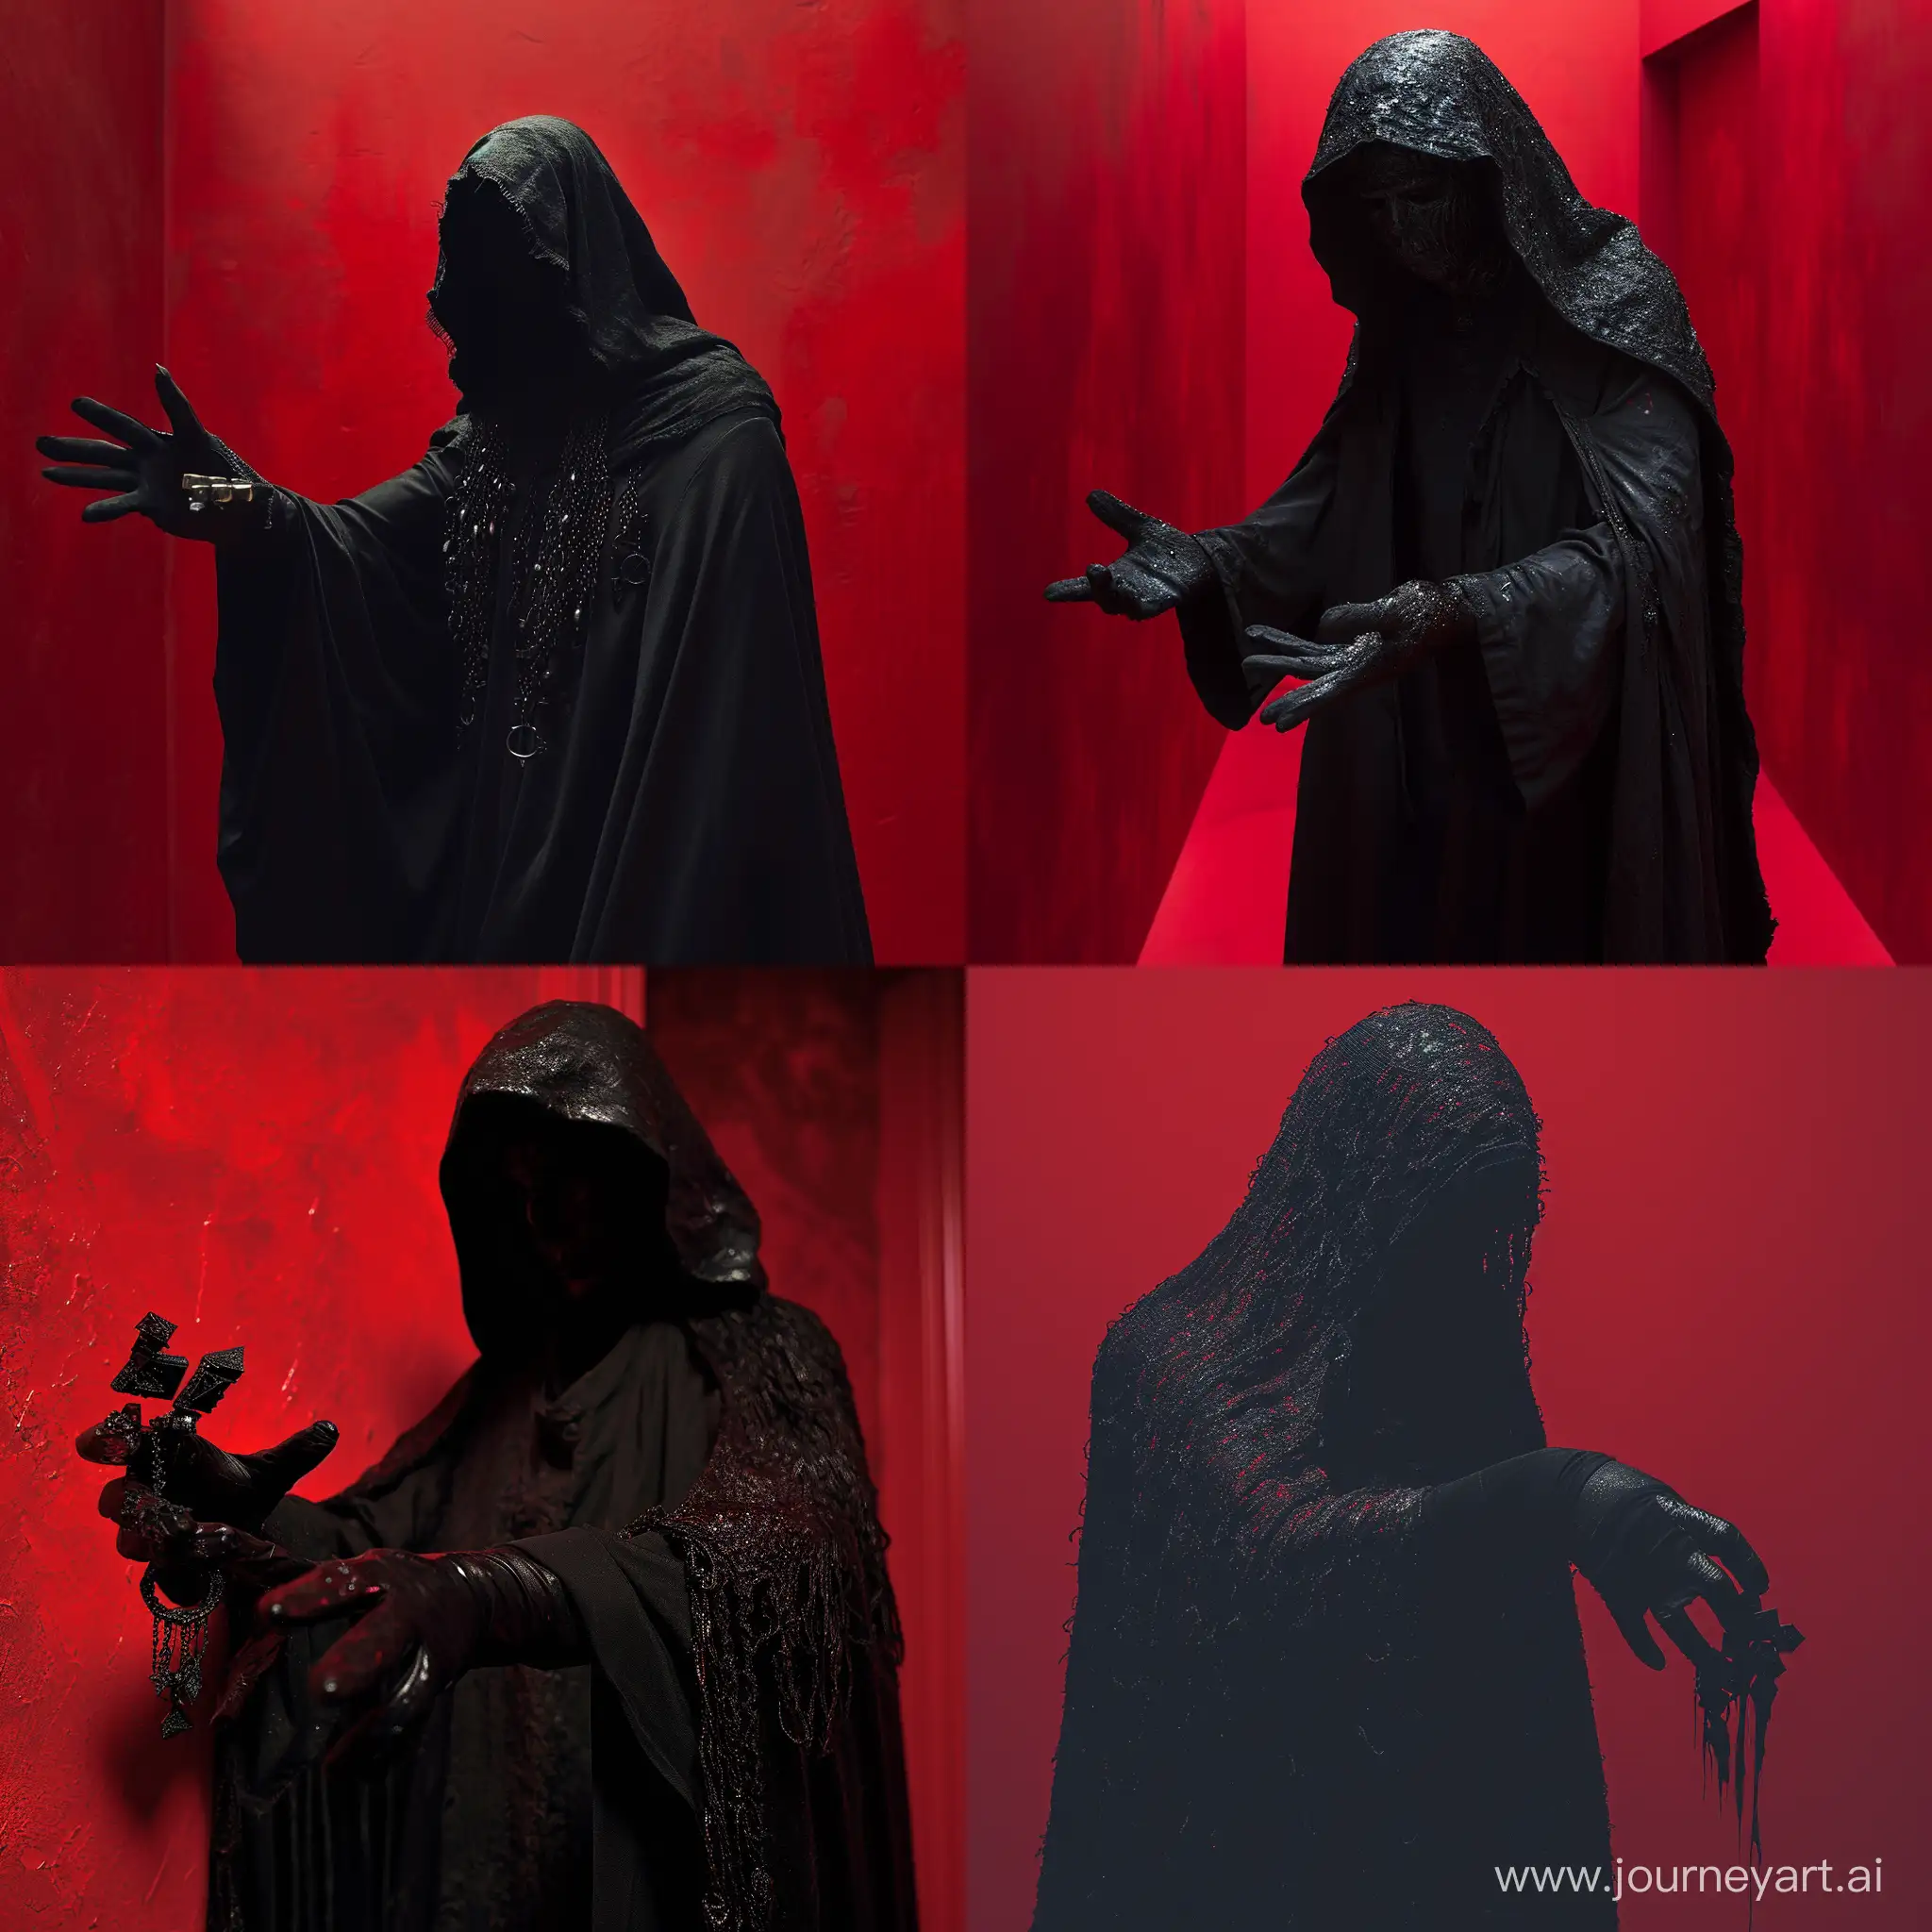 Mysterious-Figure-in-Red-Room-Offering-Runes-with-BlackGloved-Hand